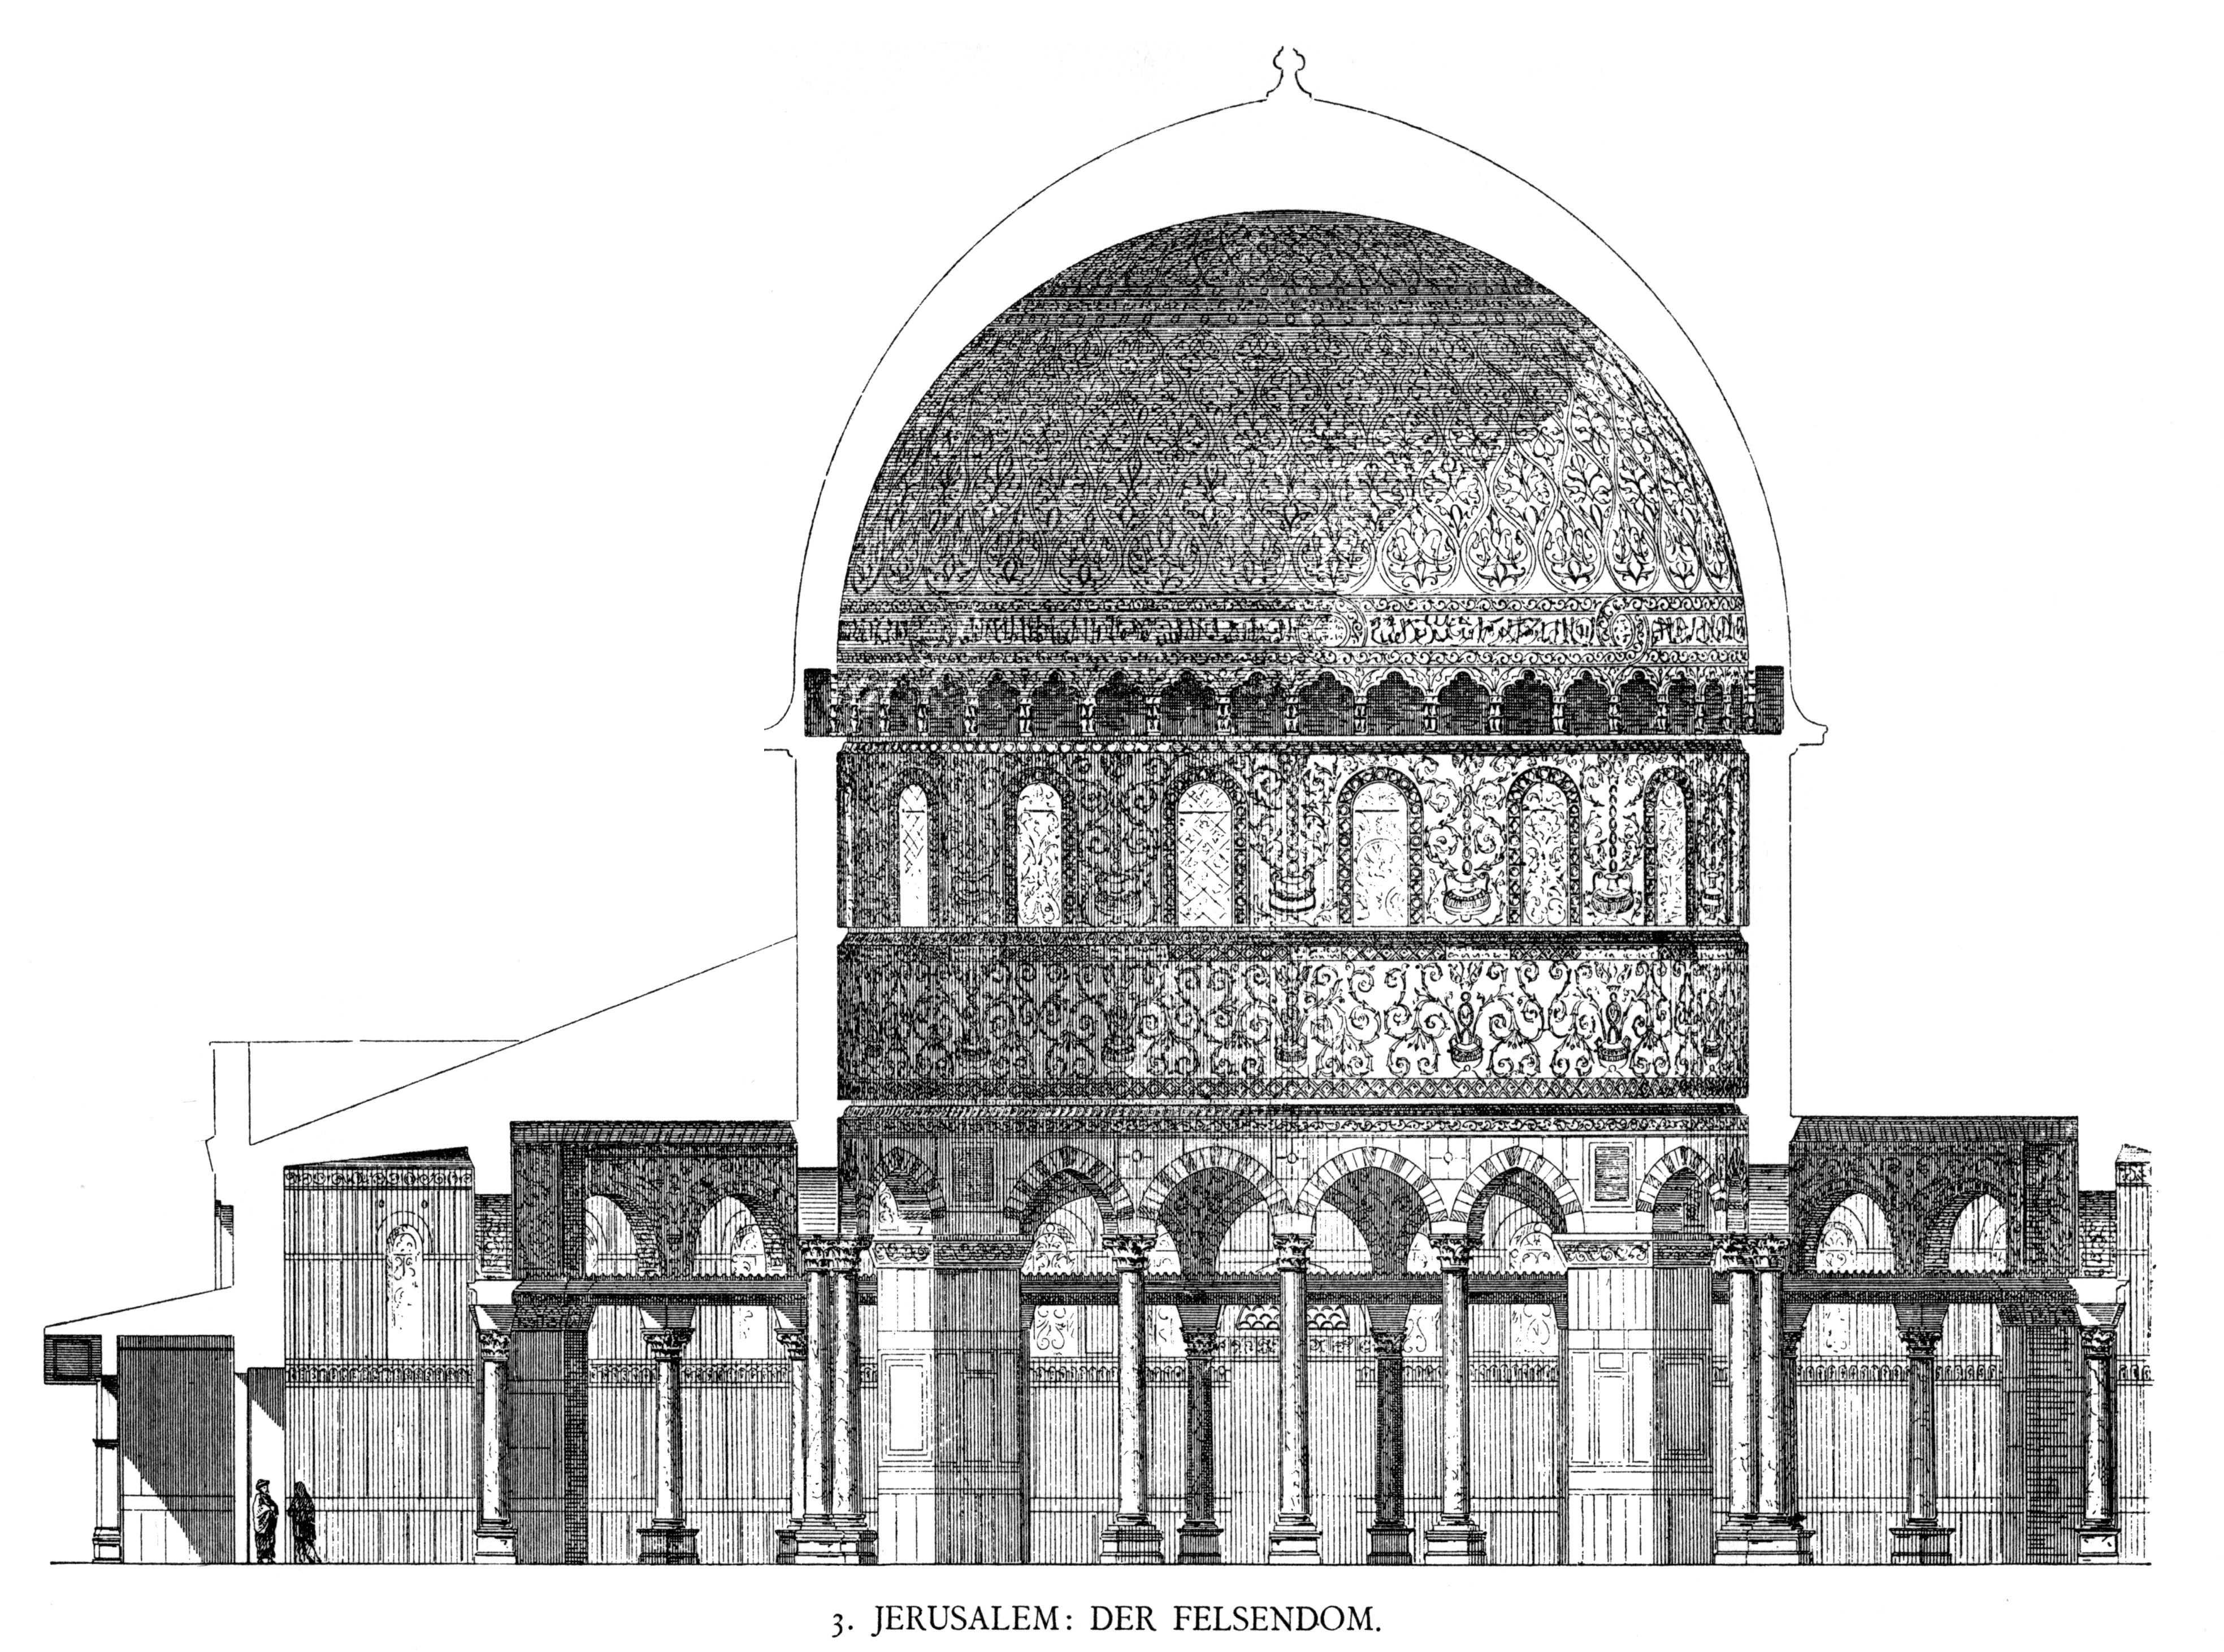 File:Dehio 10 Dome of the Rock Section.jpg - Wikimedia Commons